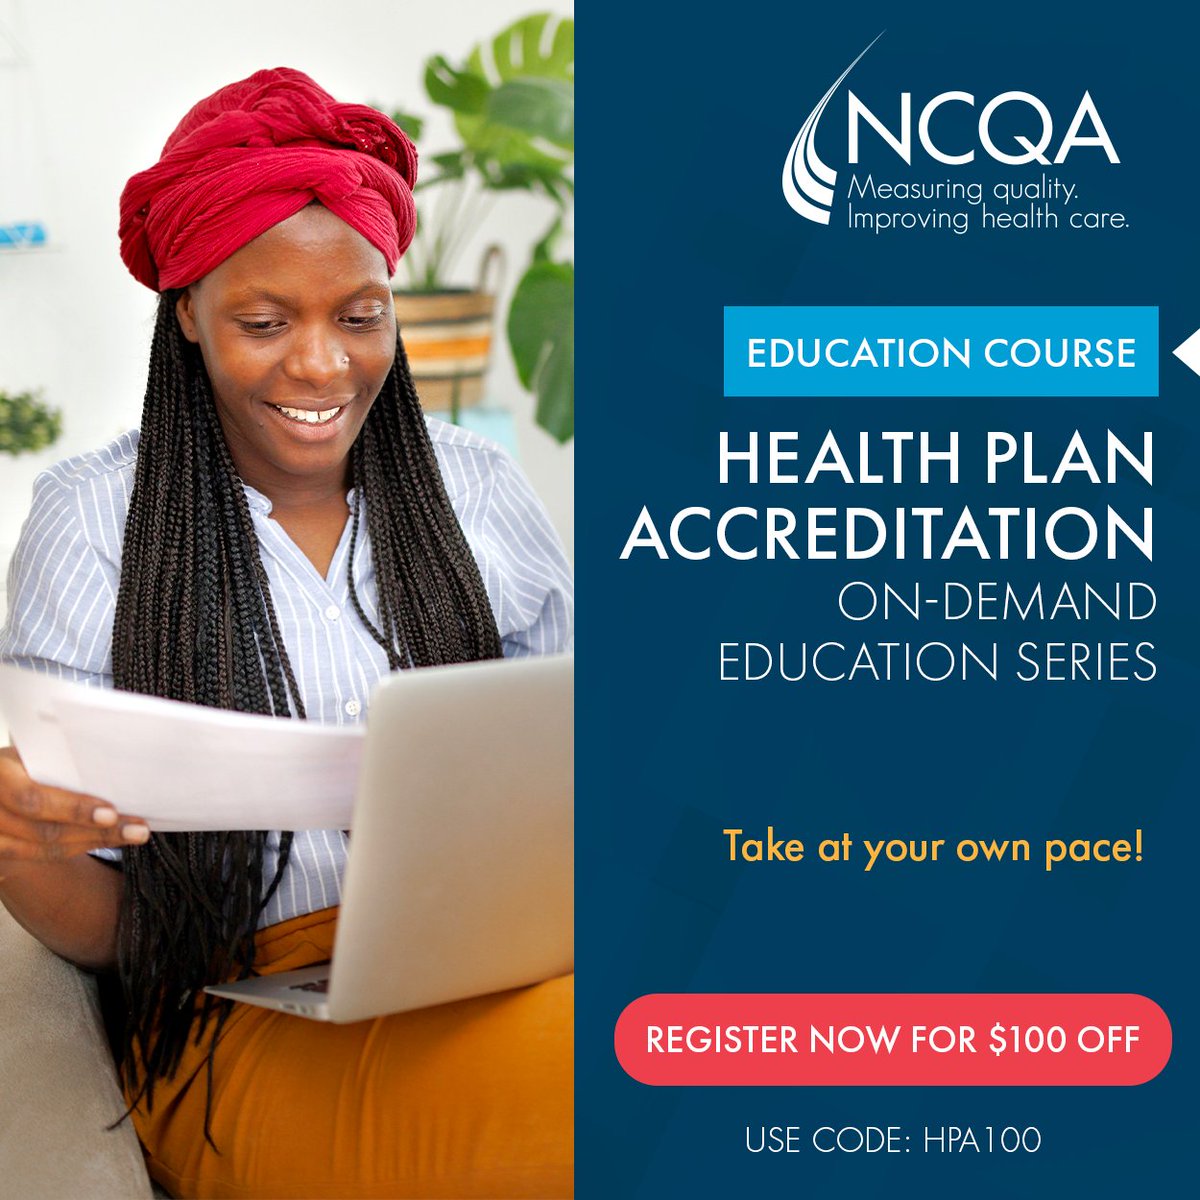 Enhance your knowledge on industry standards with our self-paced education series centered around NCQA's Health Plan Accreditation, a unique program that focuses on clinical performance and customer experience. Join us now and save $100 on your enrollment: bit.ly/3xxHpor